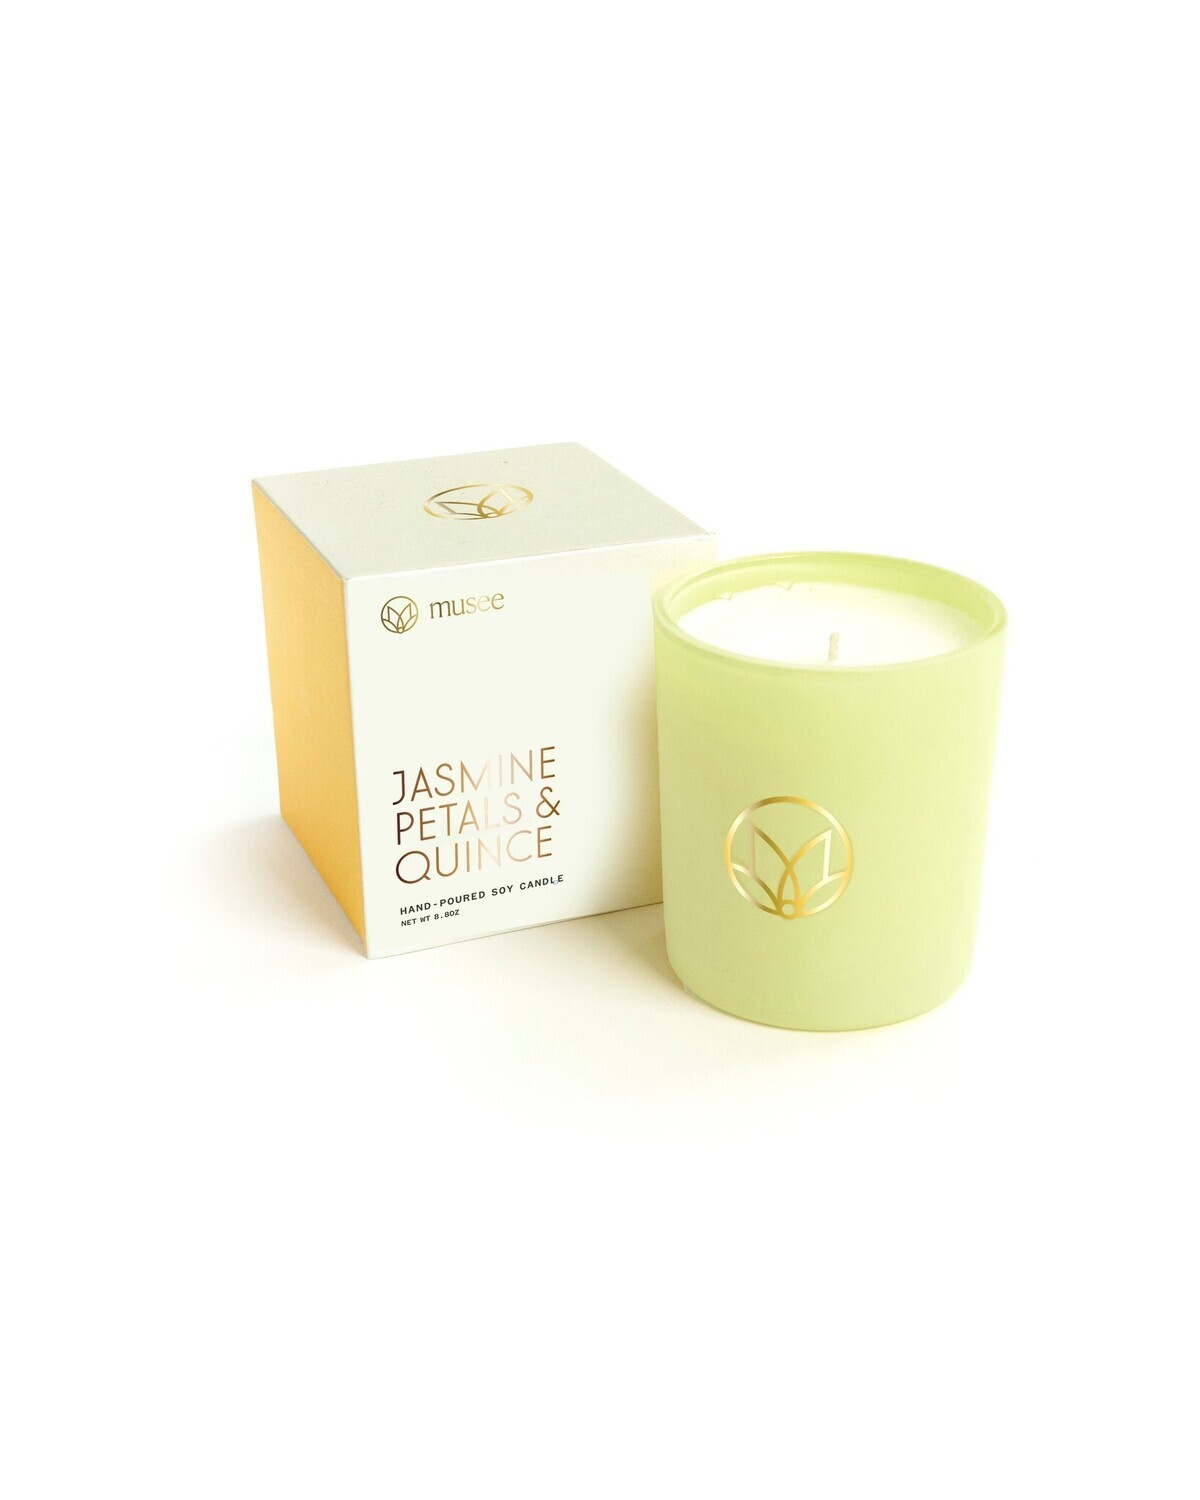 Jasmine & Quince Candle